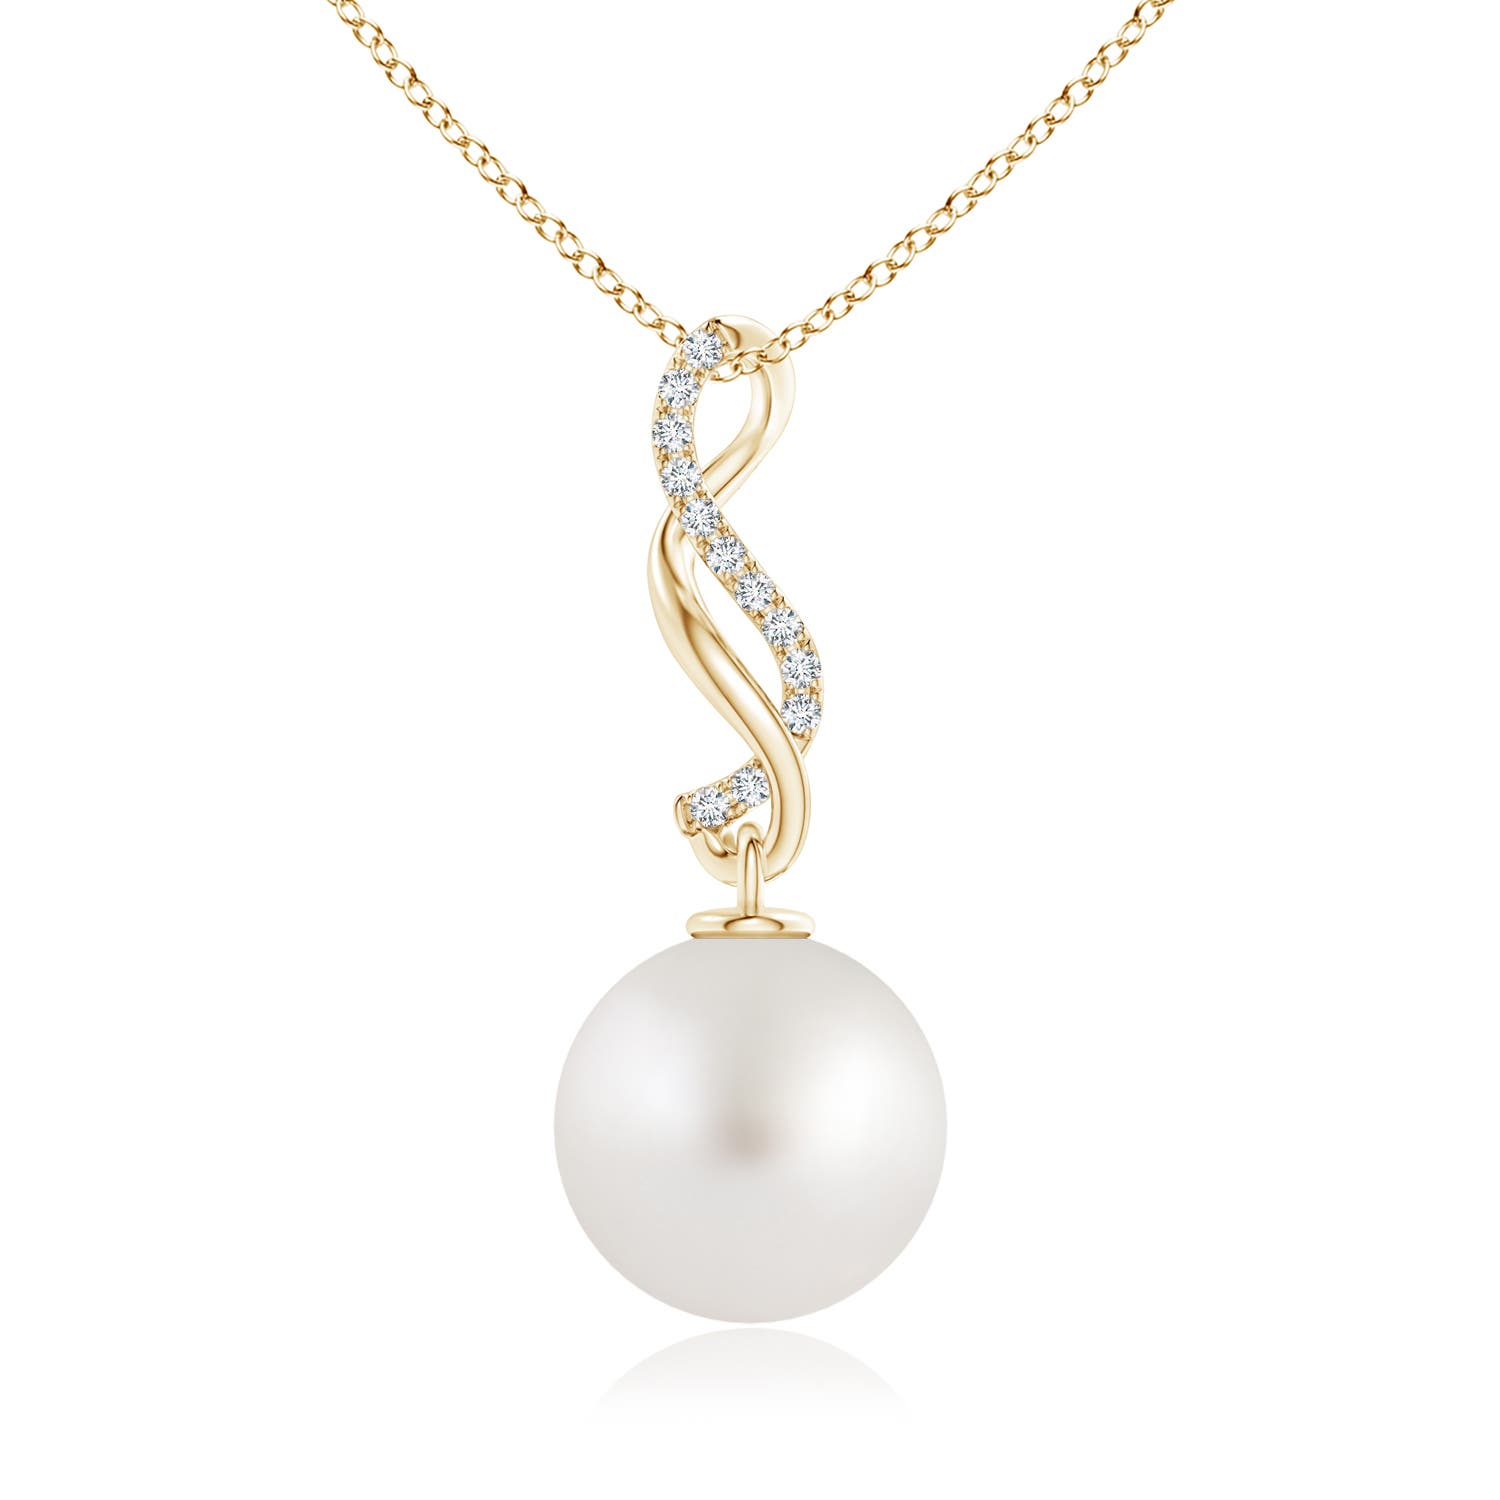 AA - South Sea Cultured Pearl / 7.26 CT / 14 KT Yellow Gold